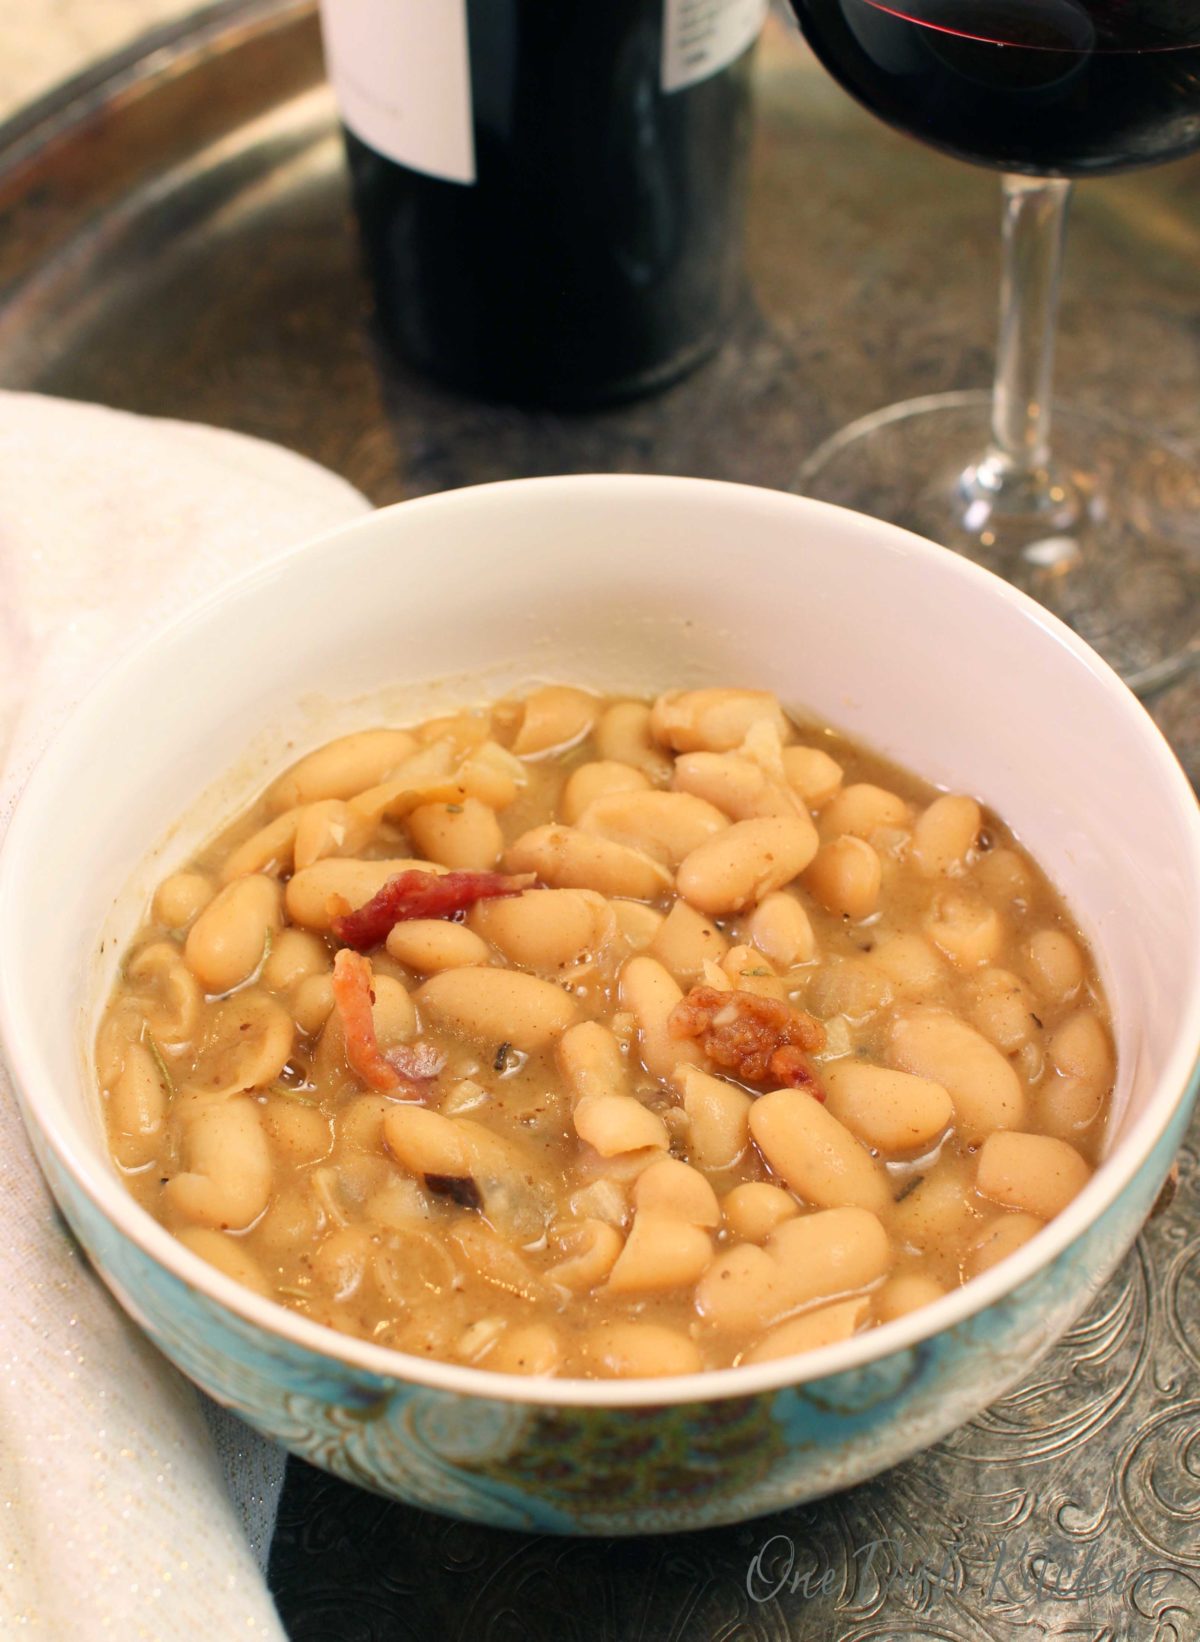 a white bowl filled with soup made with beans and bacon next to a glass of red wine and a wine bottle on a silver tray.